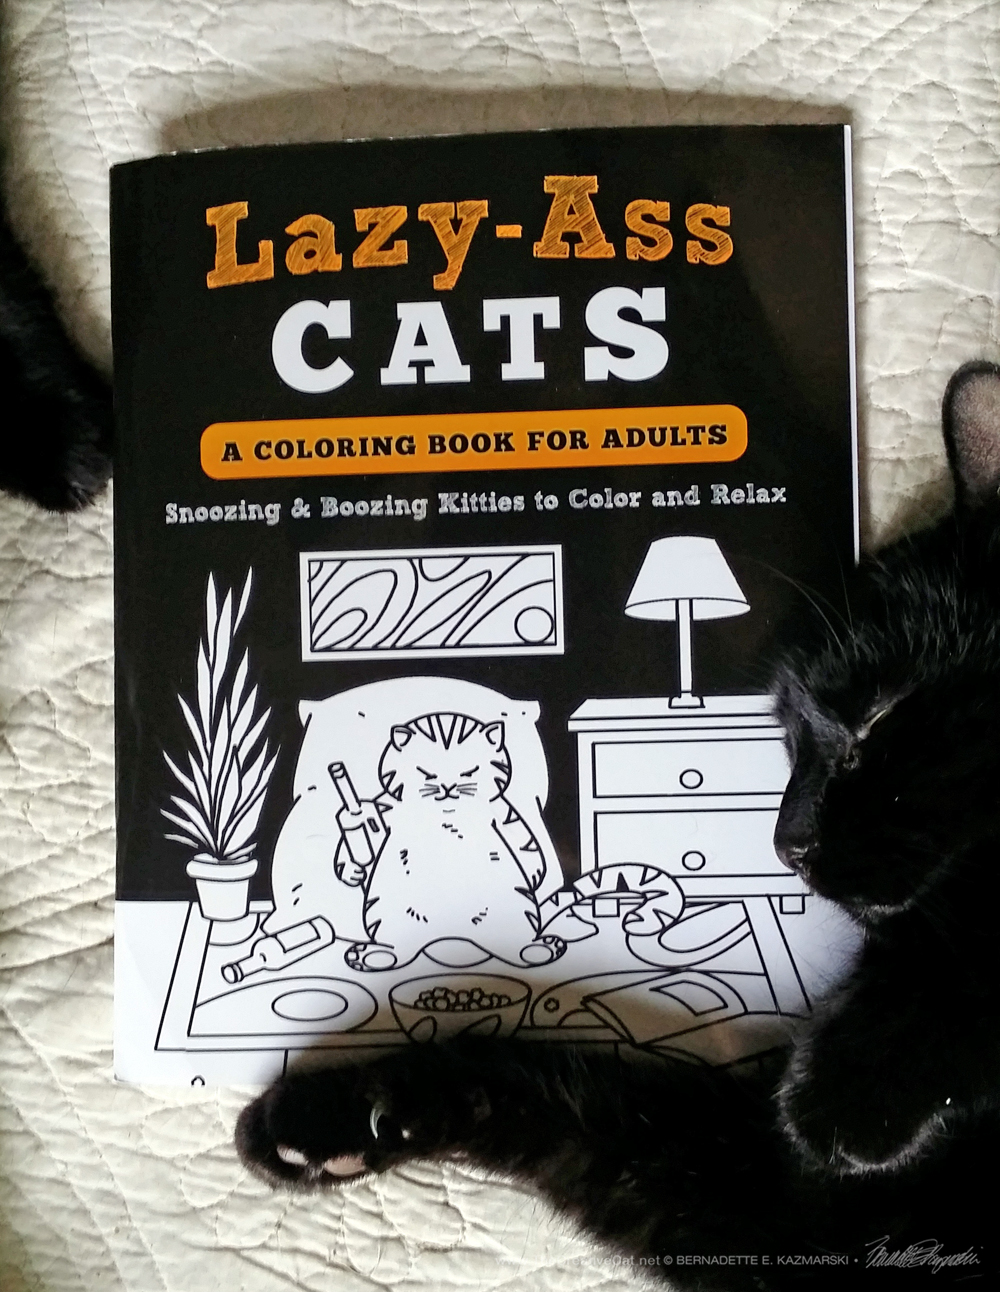 "Lazy-Ass Cats" coloring book.